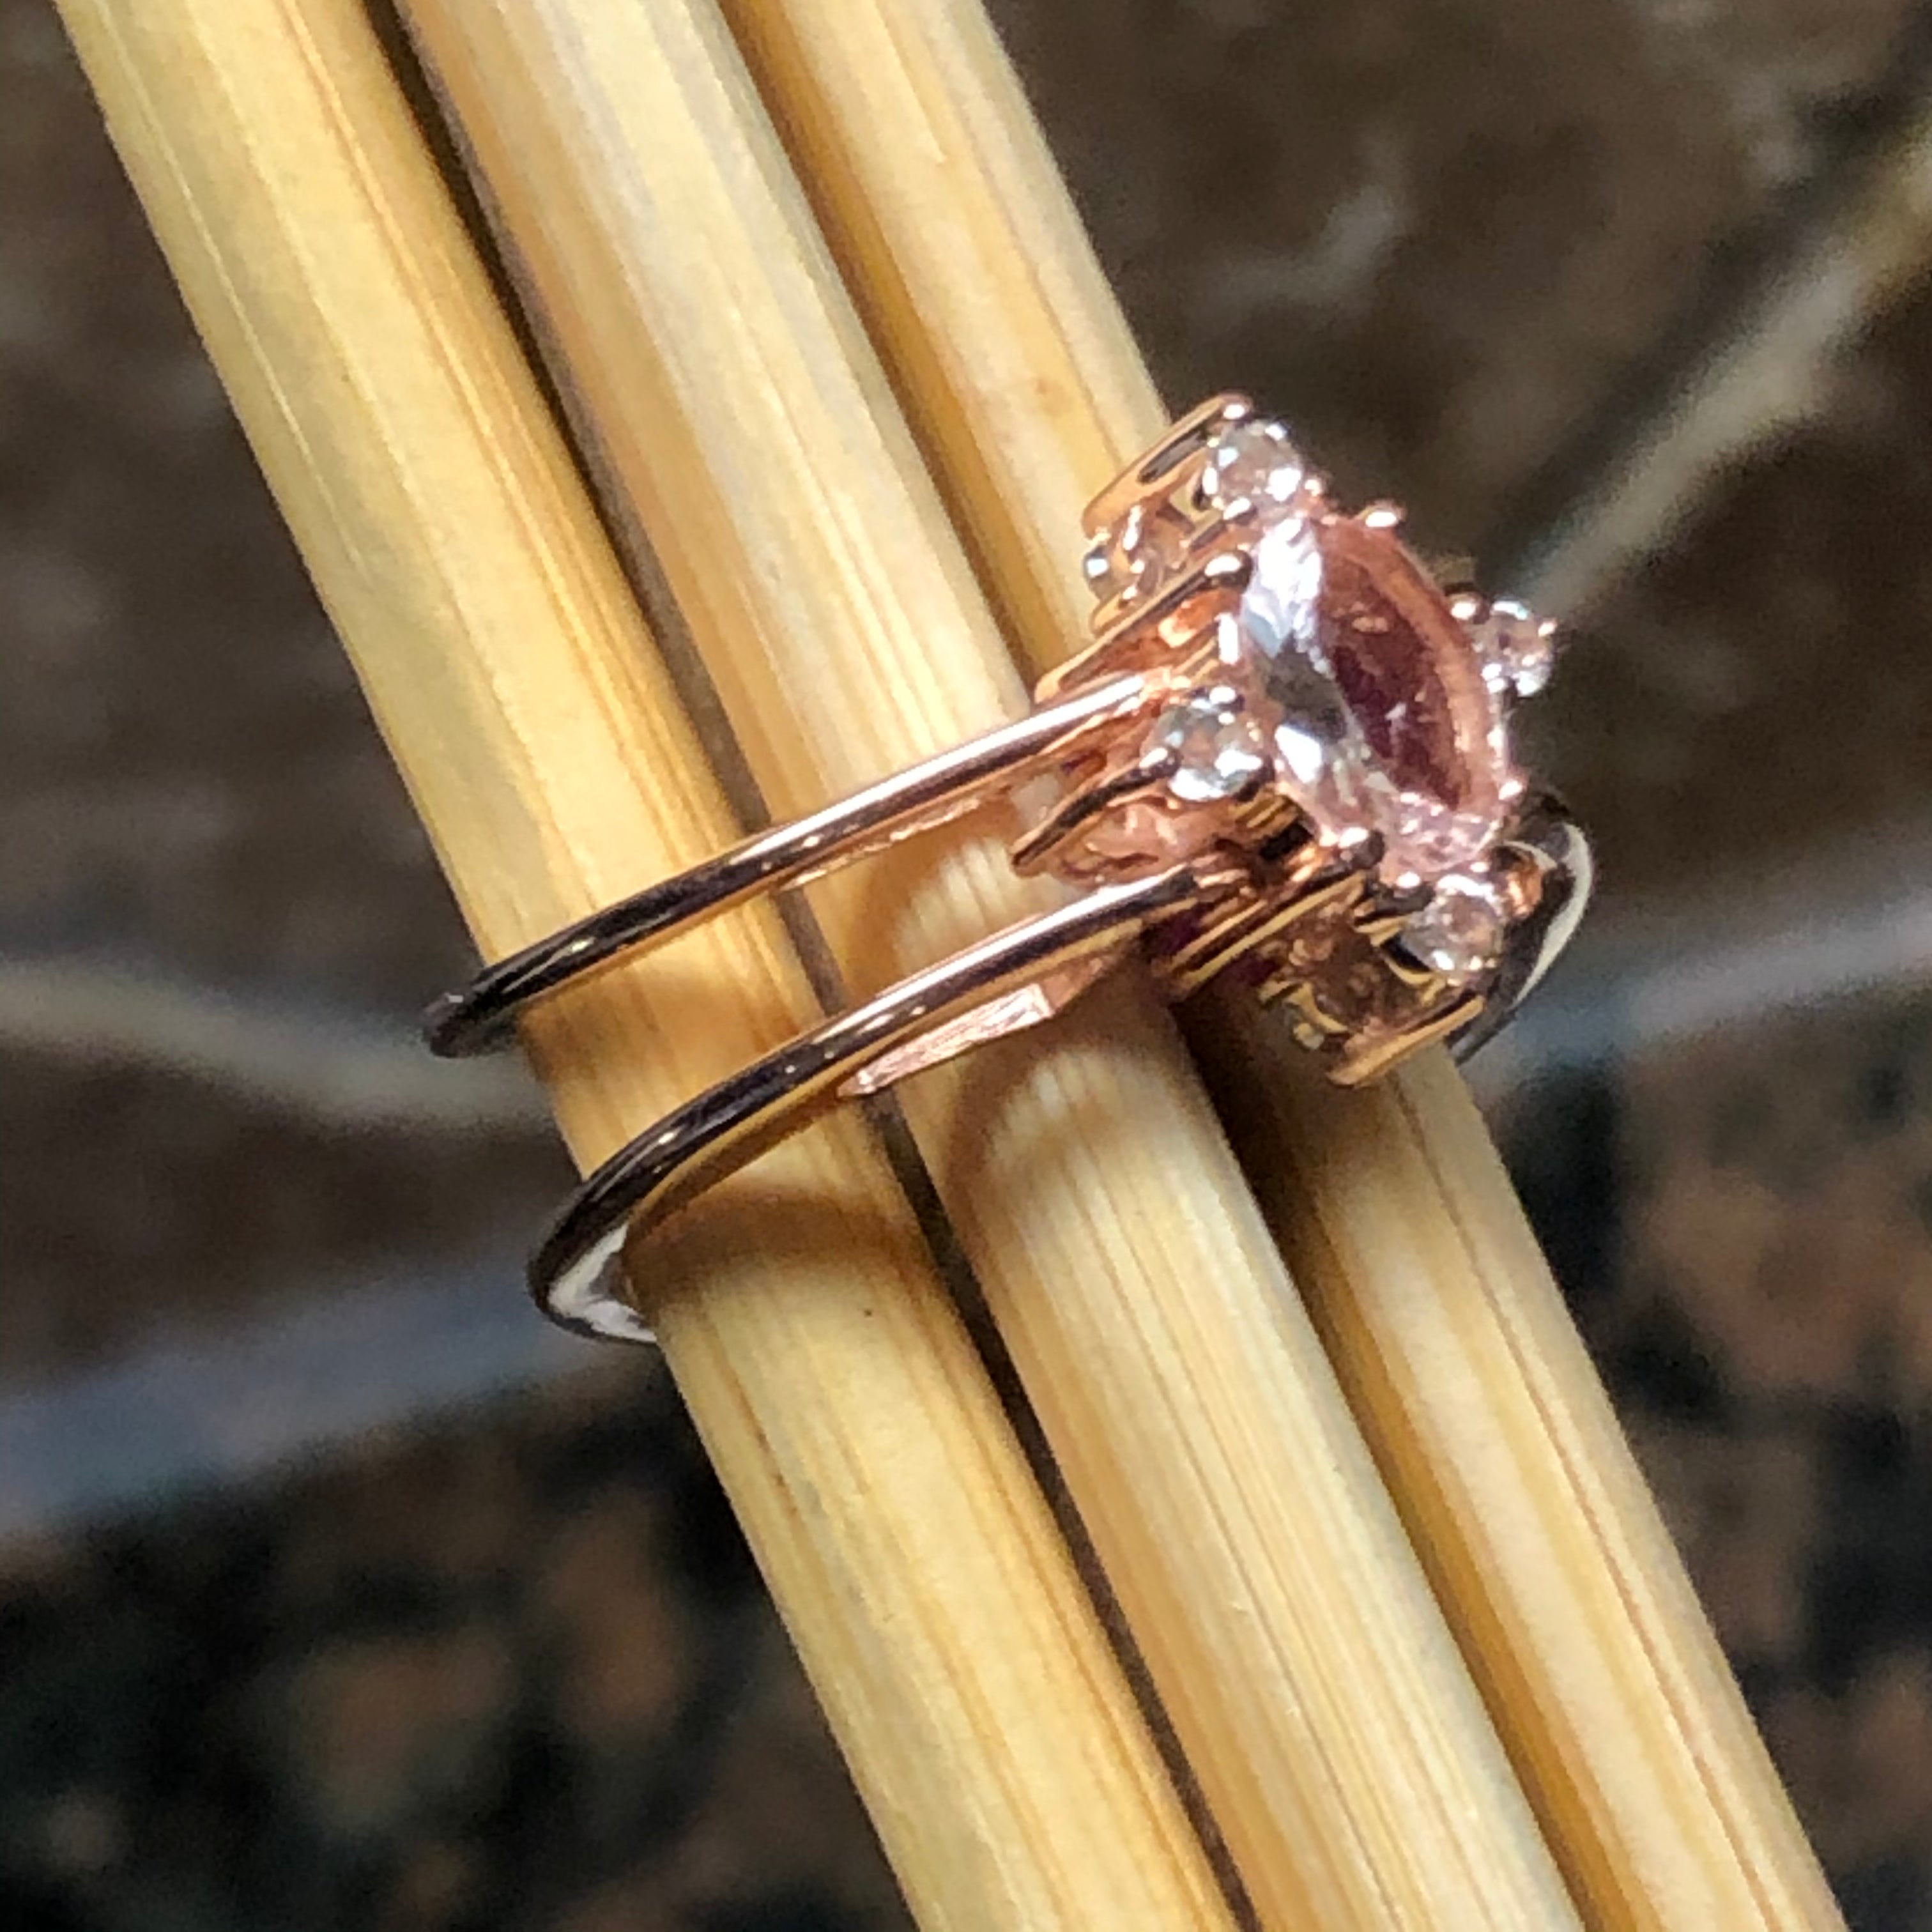 Natural Ruby, Morganite, White Diamond 14k Rose Gold Over Sterling Silver Engagement Ring Size 6, 7, 8, 9 - Natural Rocks by Kala